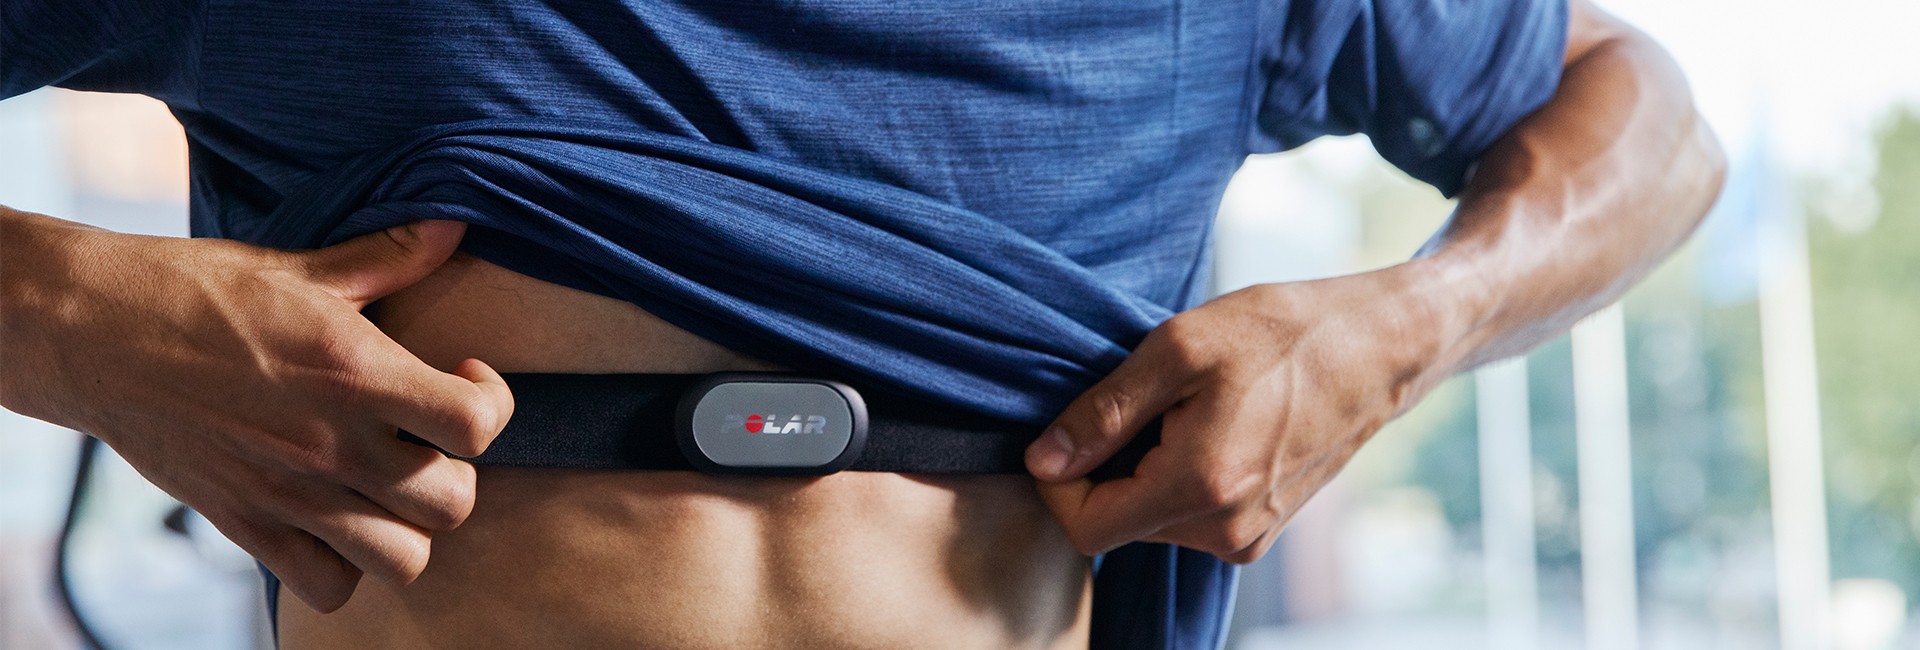 polar chest heart rate monitor